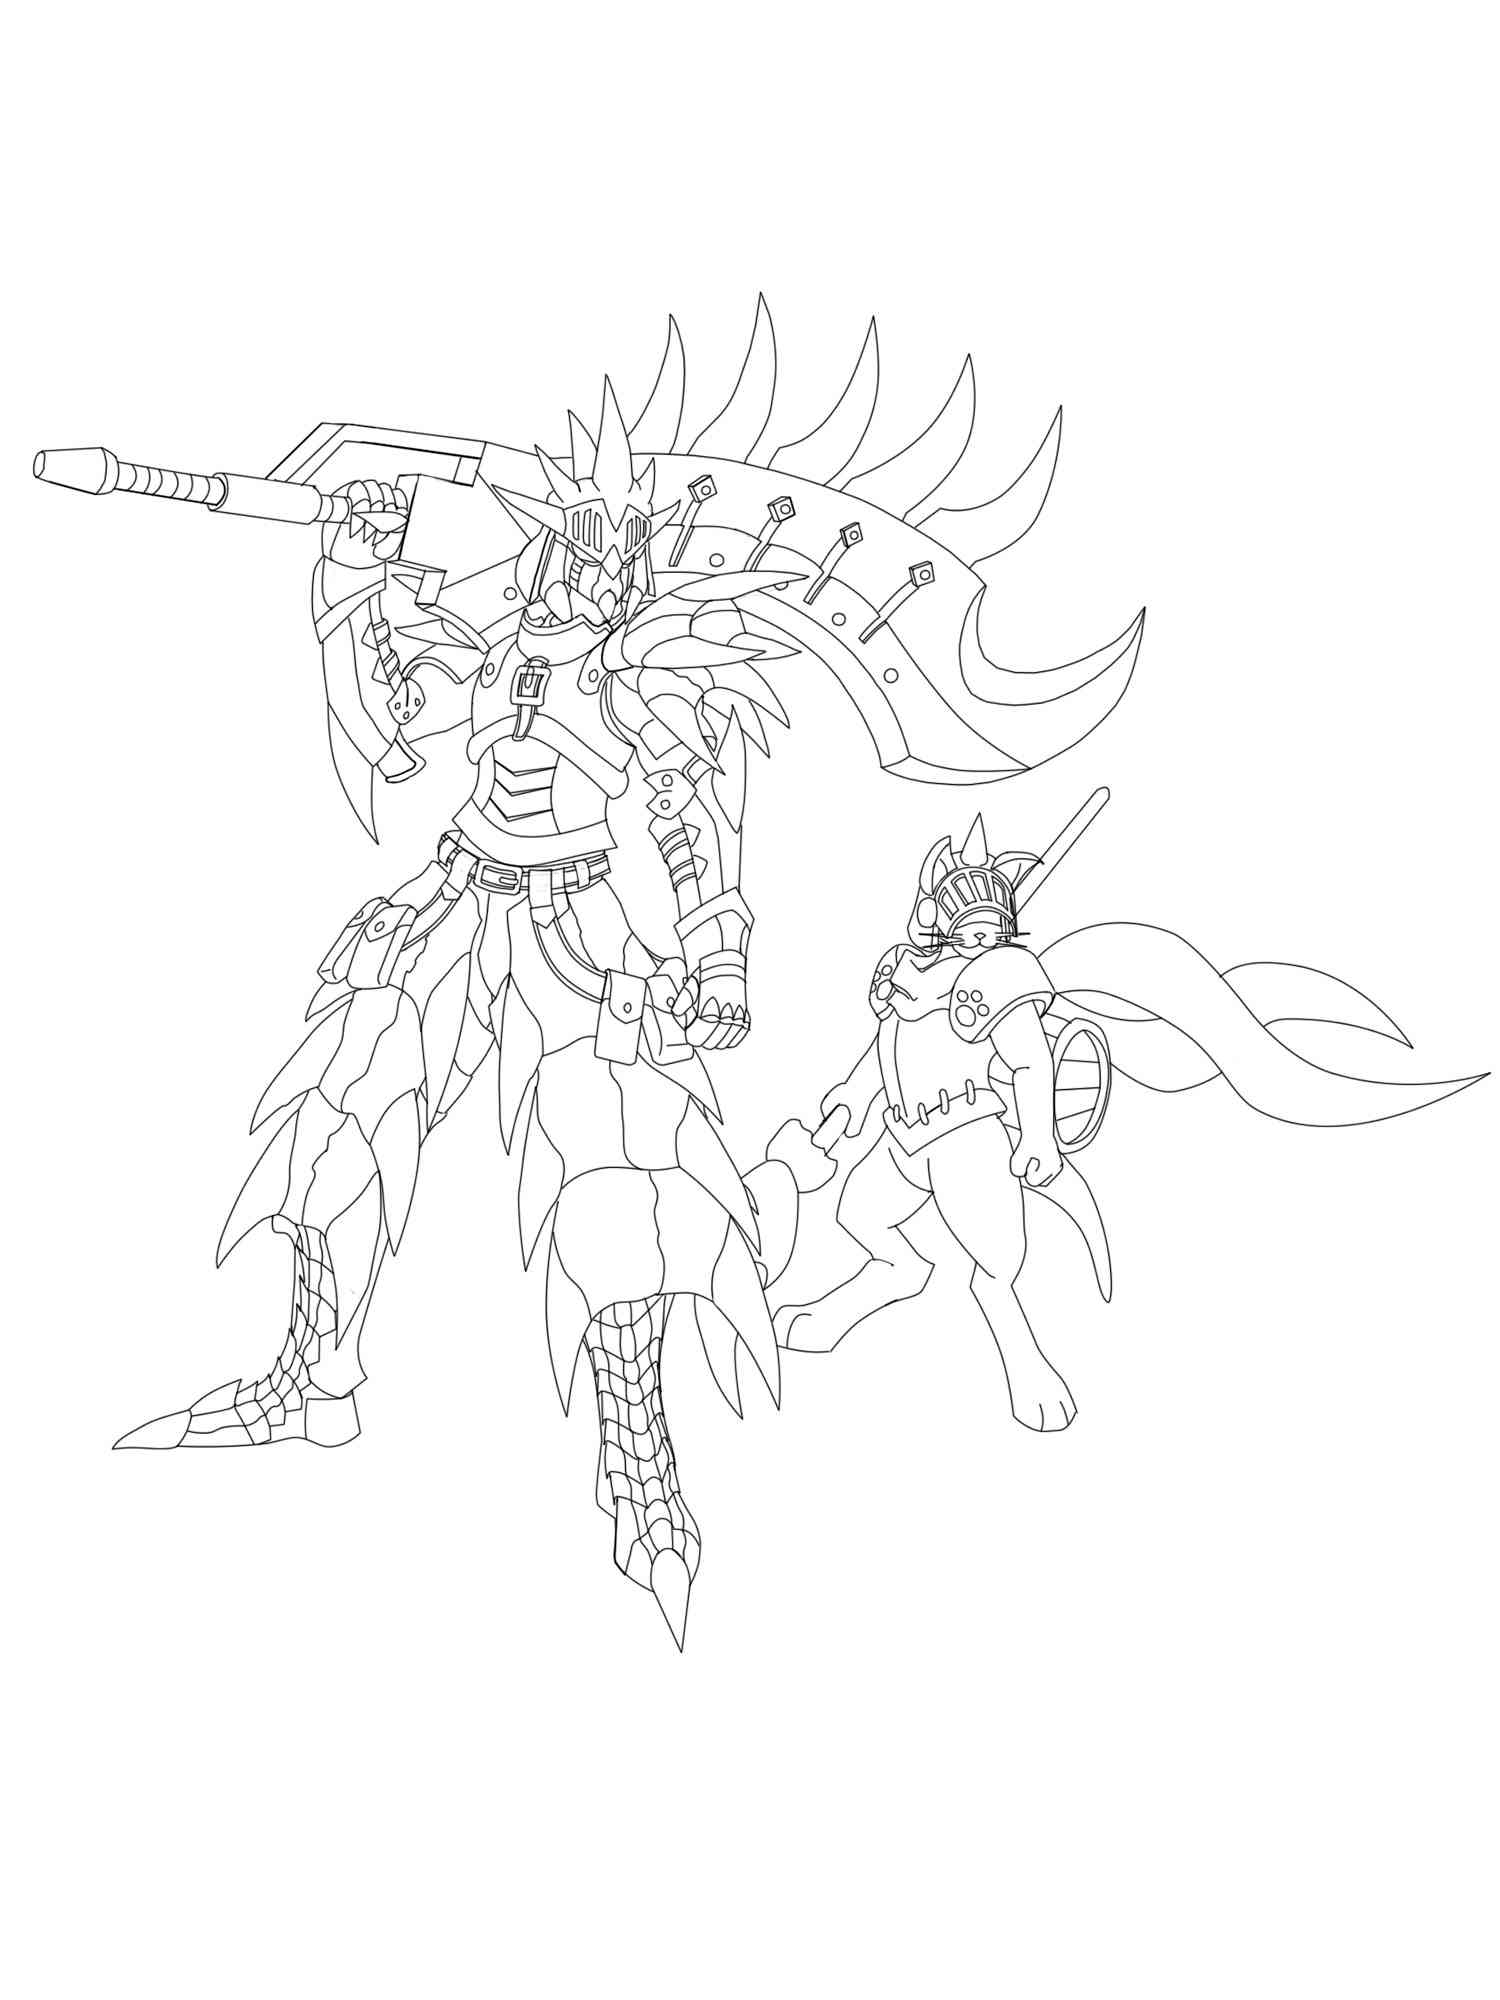 Rathalos Armor Monster Hunter coloring page